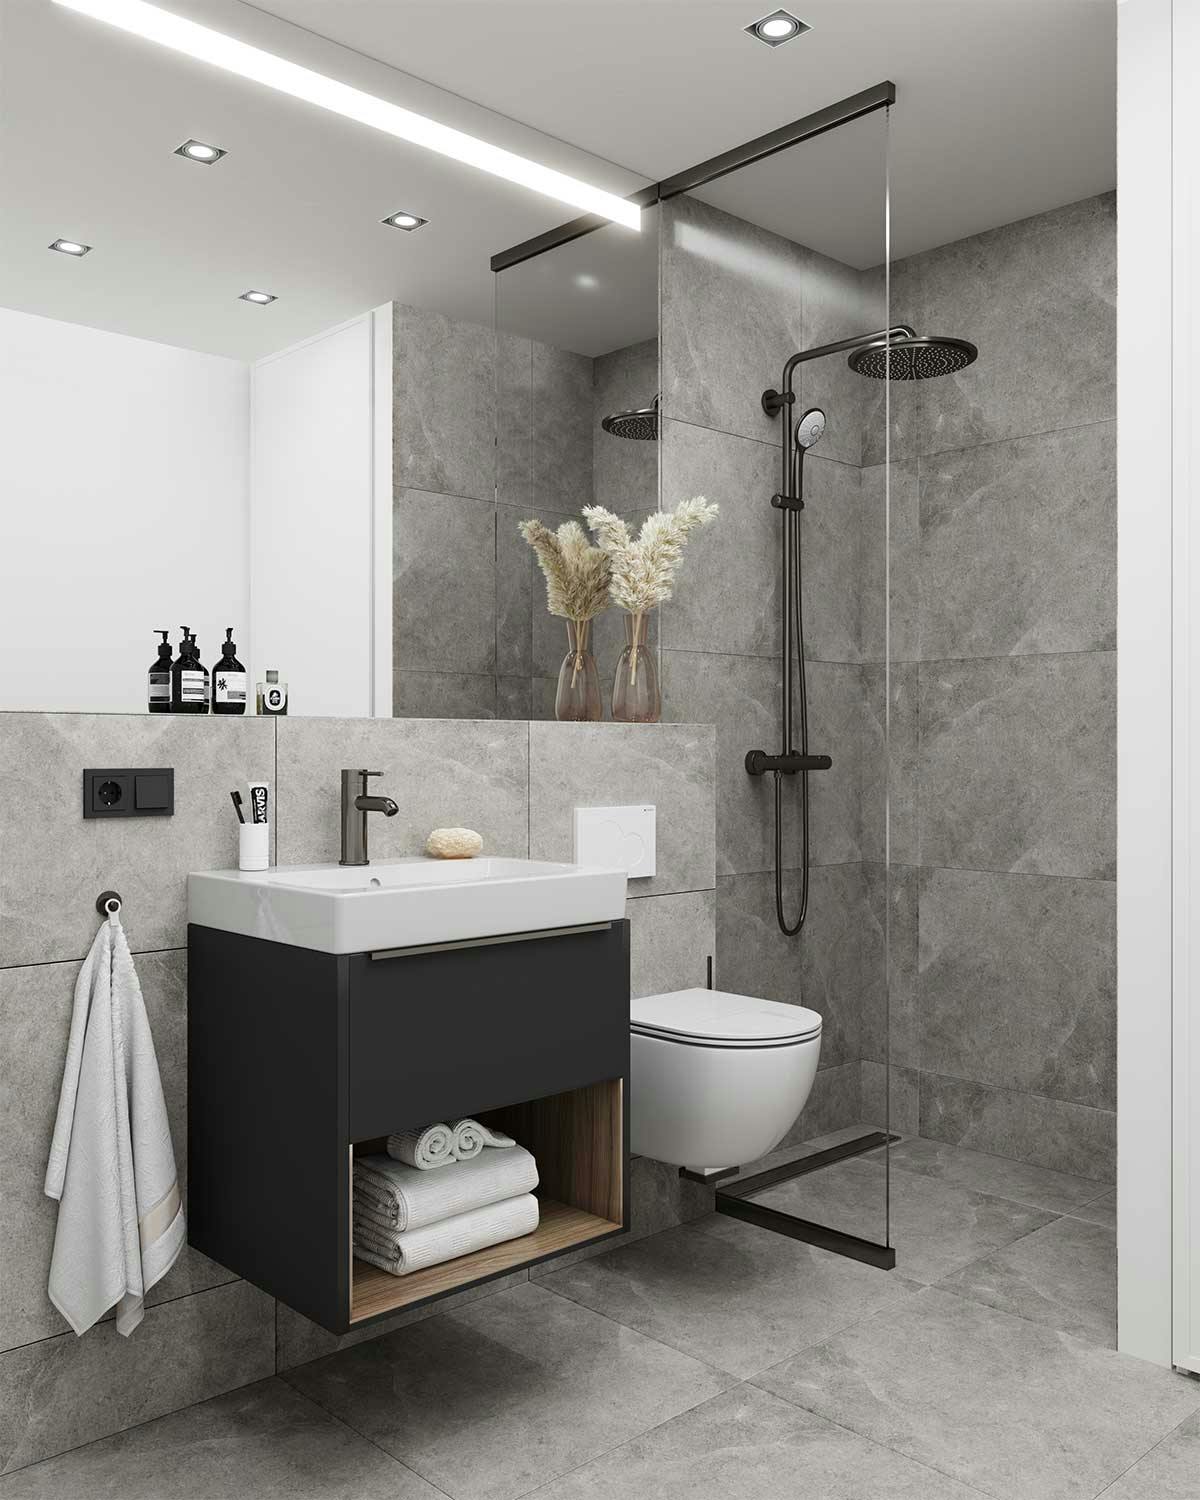 3D Interior Visualization with the interior design of a bathroom of the real estate in Hamburg.